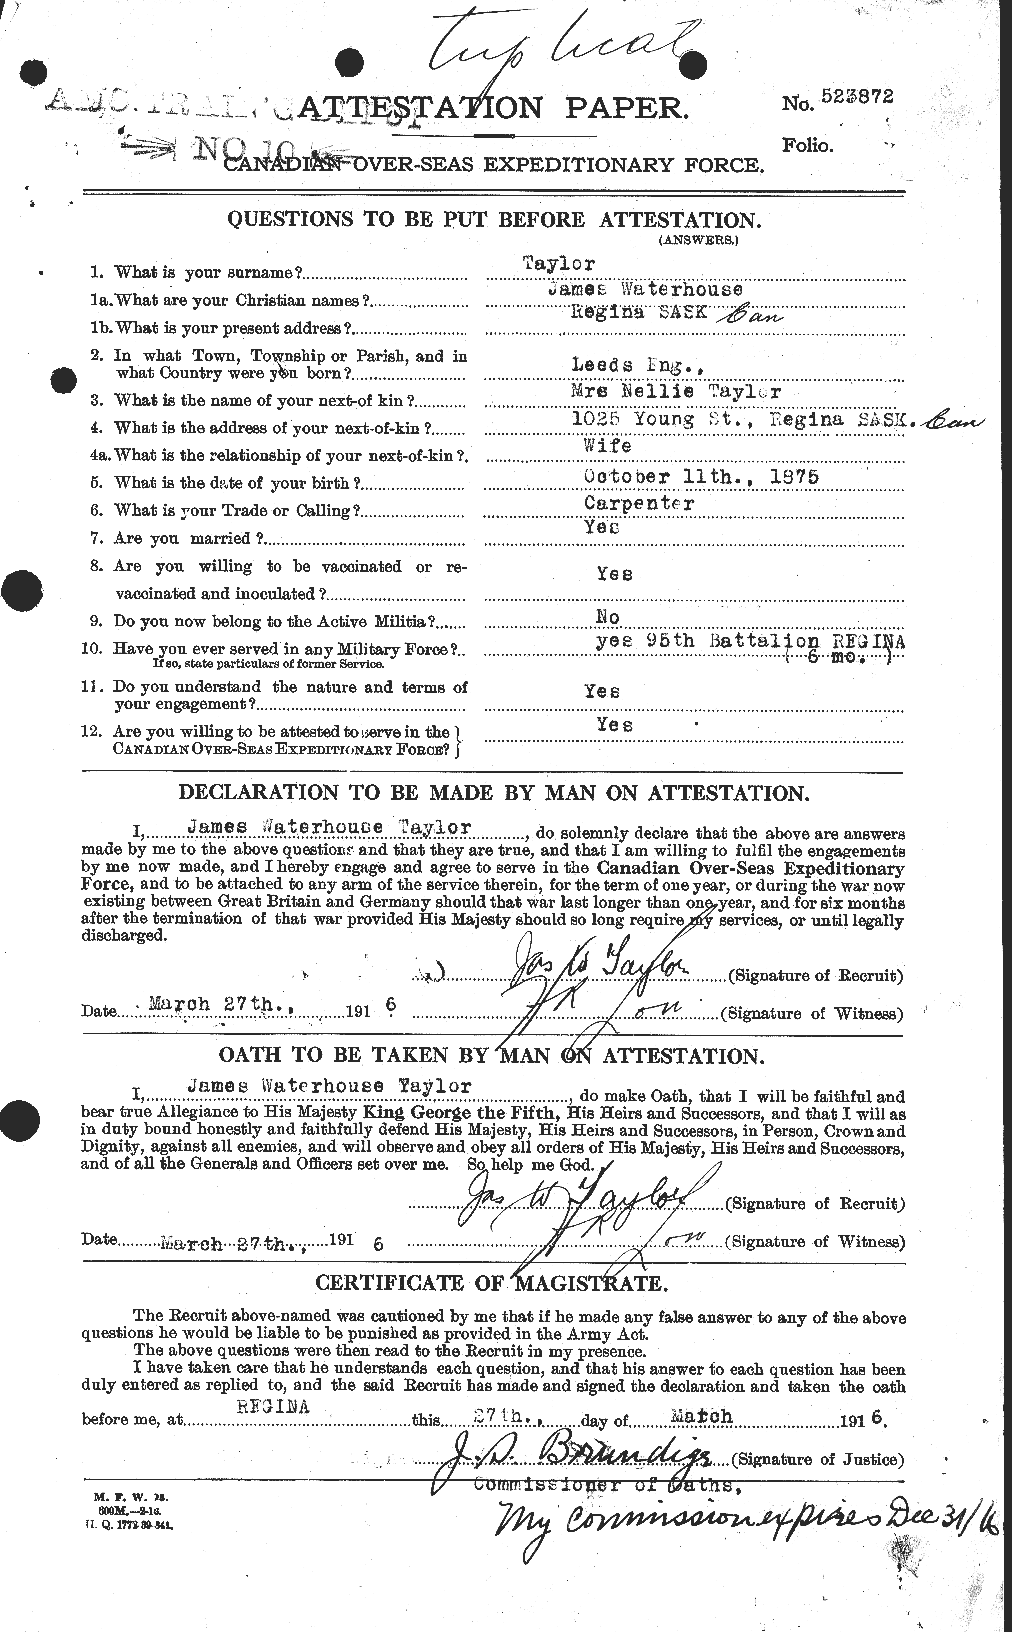 Personnel Records of the First World War - CEF 626963a